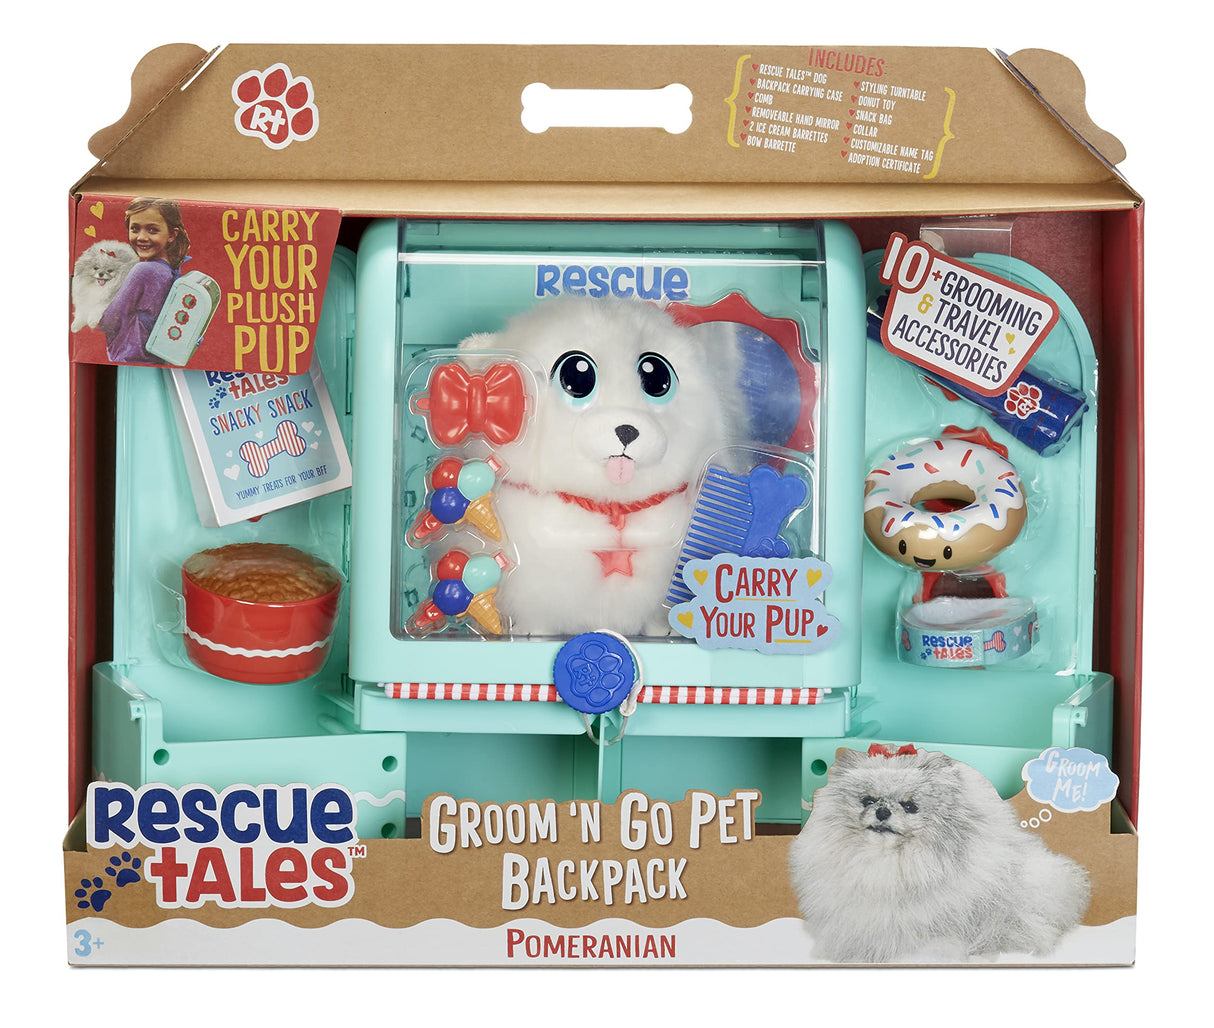 Little Tikes Rescue Tales Groom 'n Go Pet Backpack with Soft Plush Pomeranian Stuffed Animal Toy, Grooming Salon Playset, 9+ Accessories-Gifts for Kids, Toys for Girls & Boys Ages 3 4 5